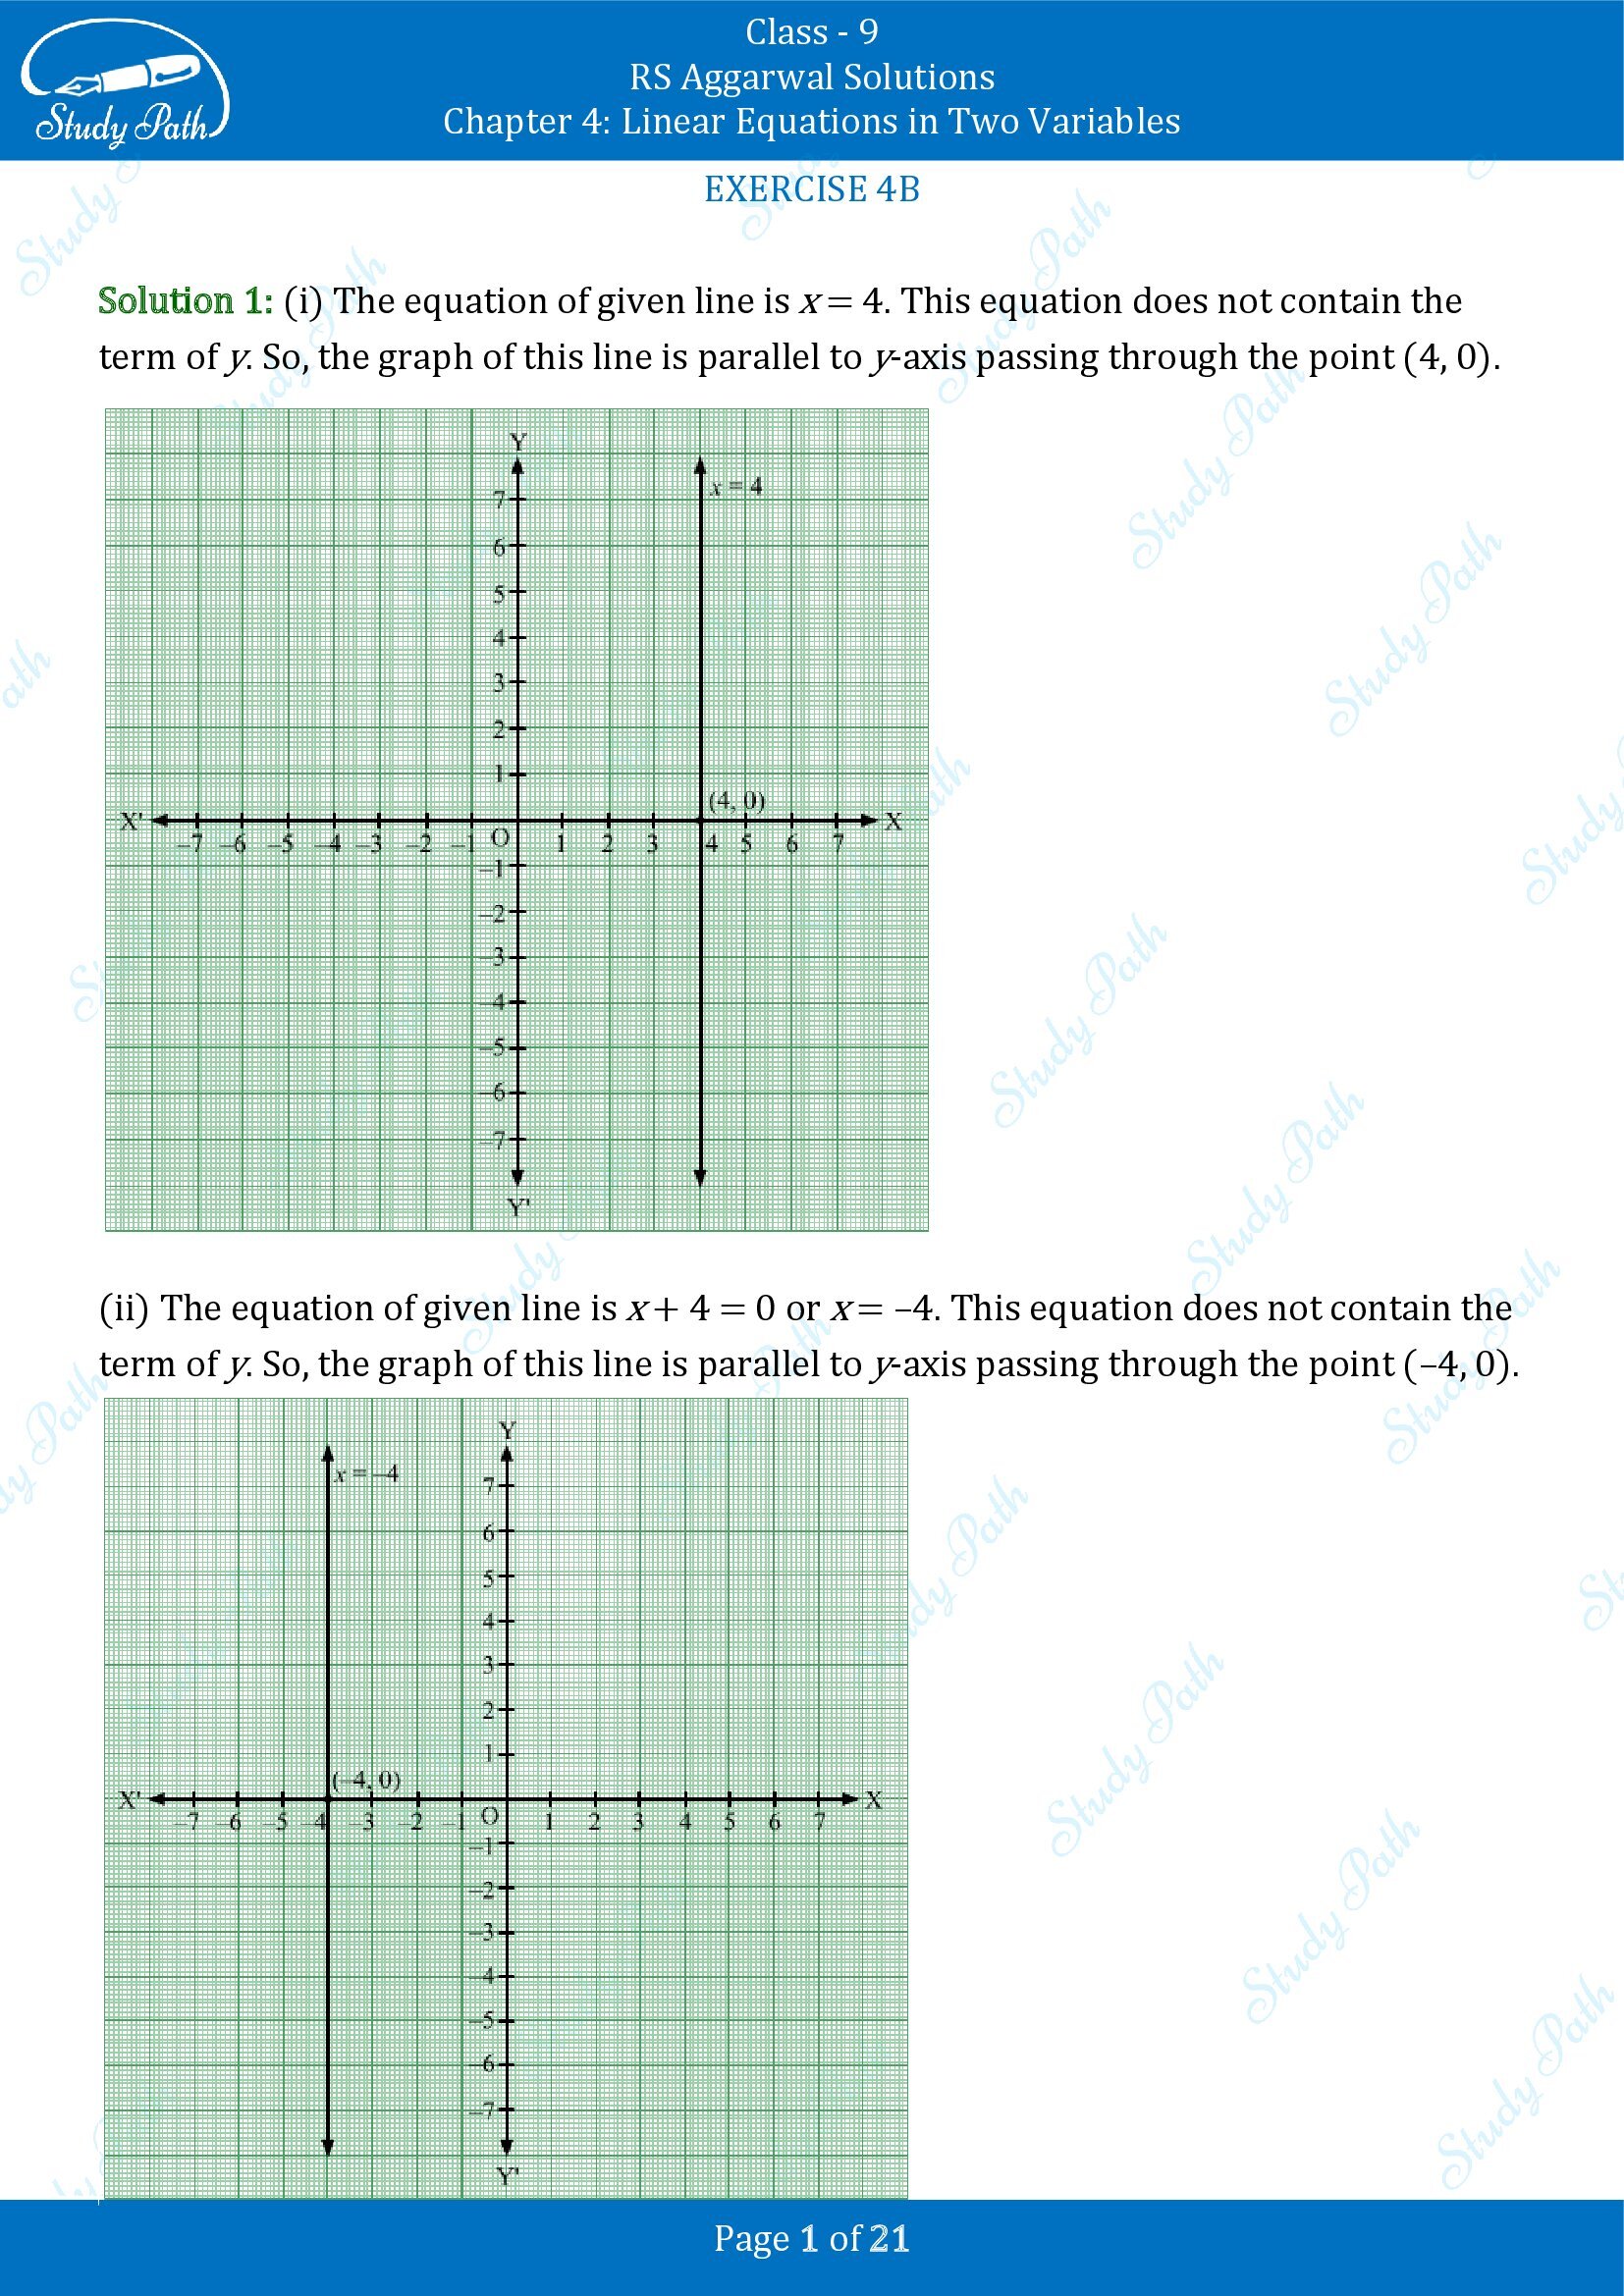 RS Aggarwal Solutions Class 9 Chapter 4 Linear Equations in Two Variables Exercise 4B 00001